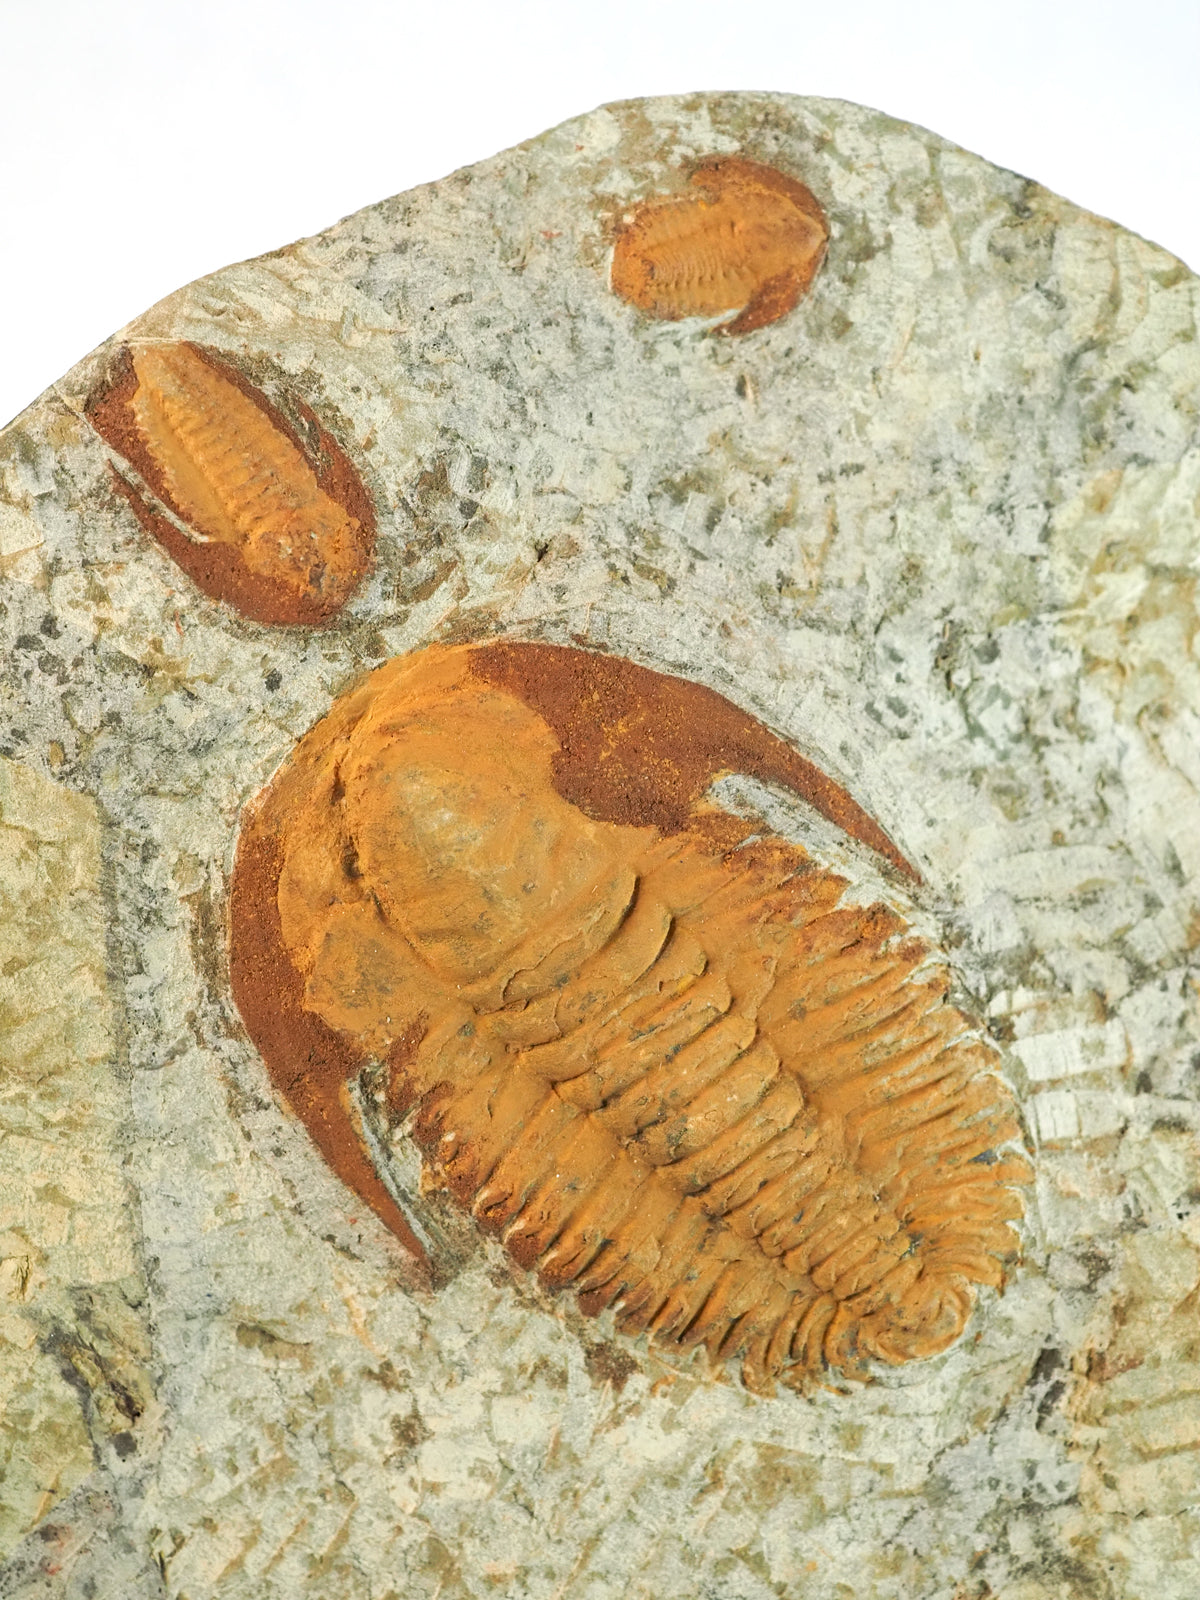 Swimming Paradoxides Trilobite Mortality Plate